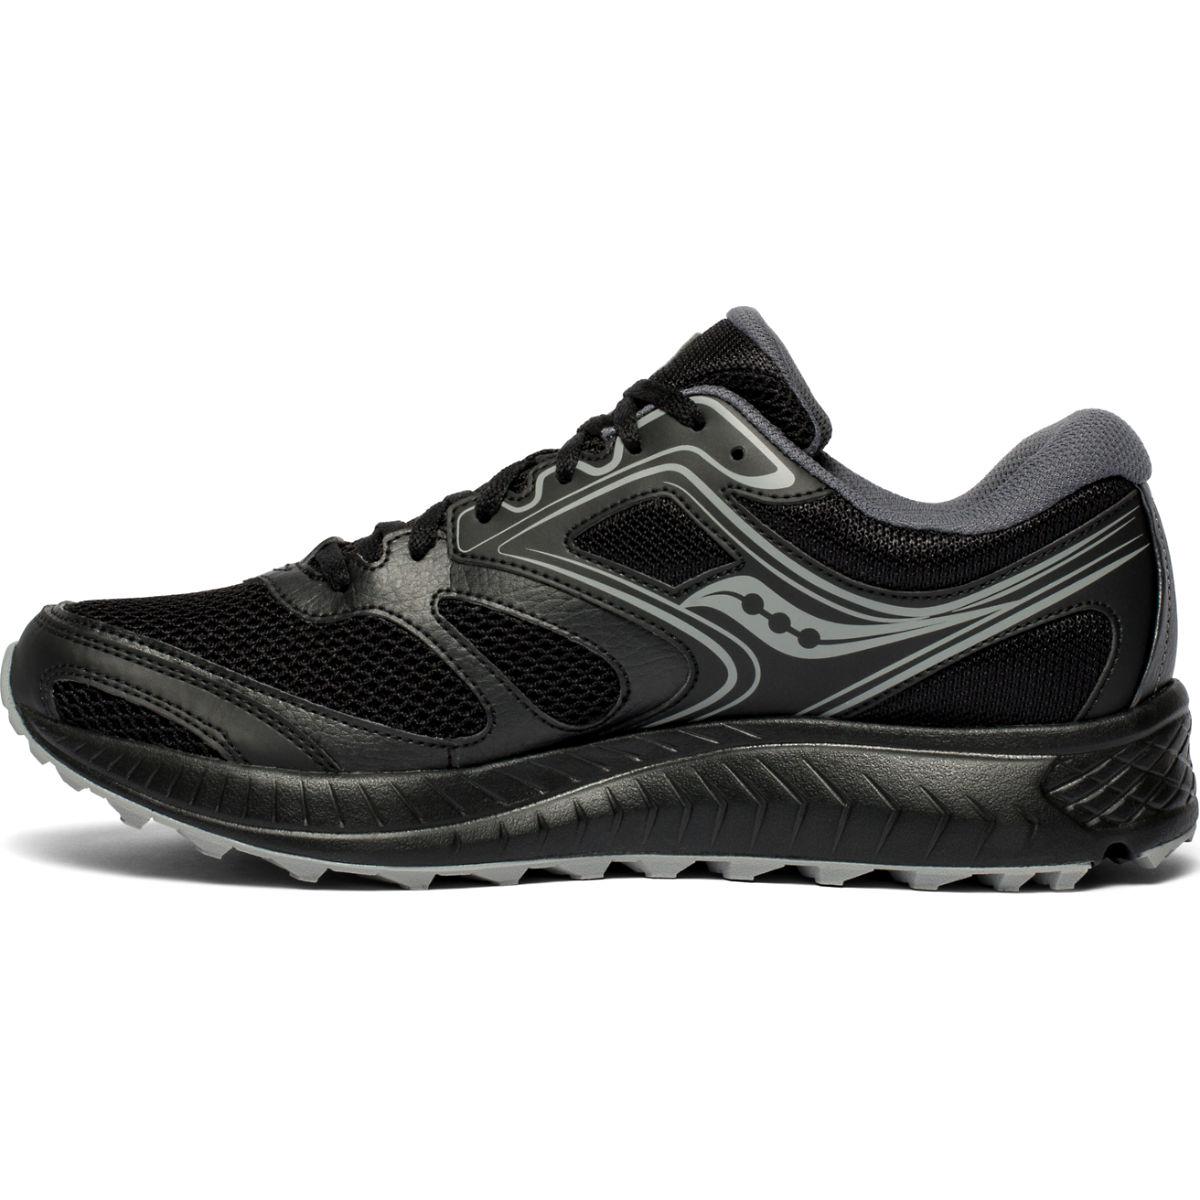 Saucony Rubber Cohesion Tr12 in Black 